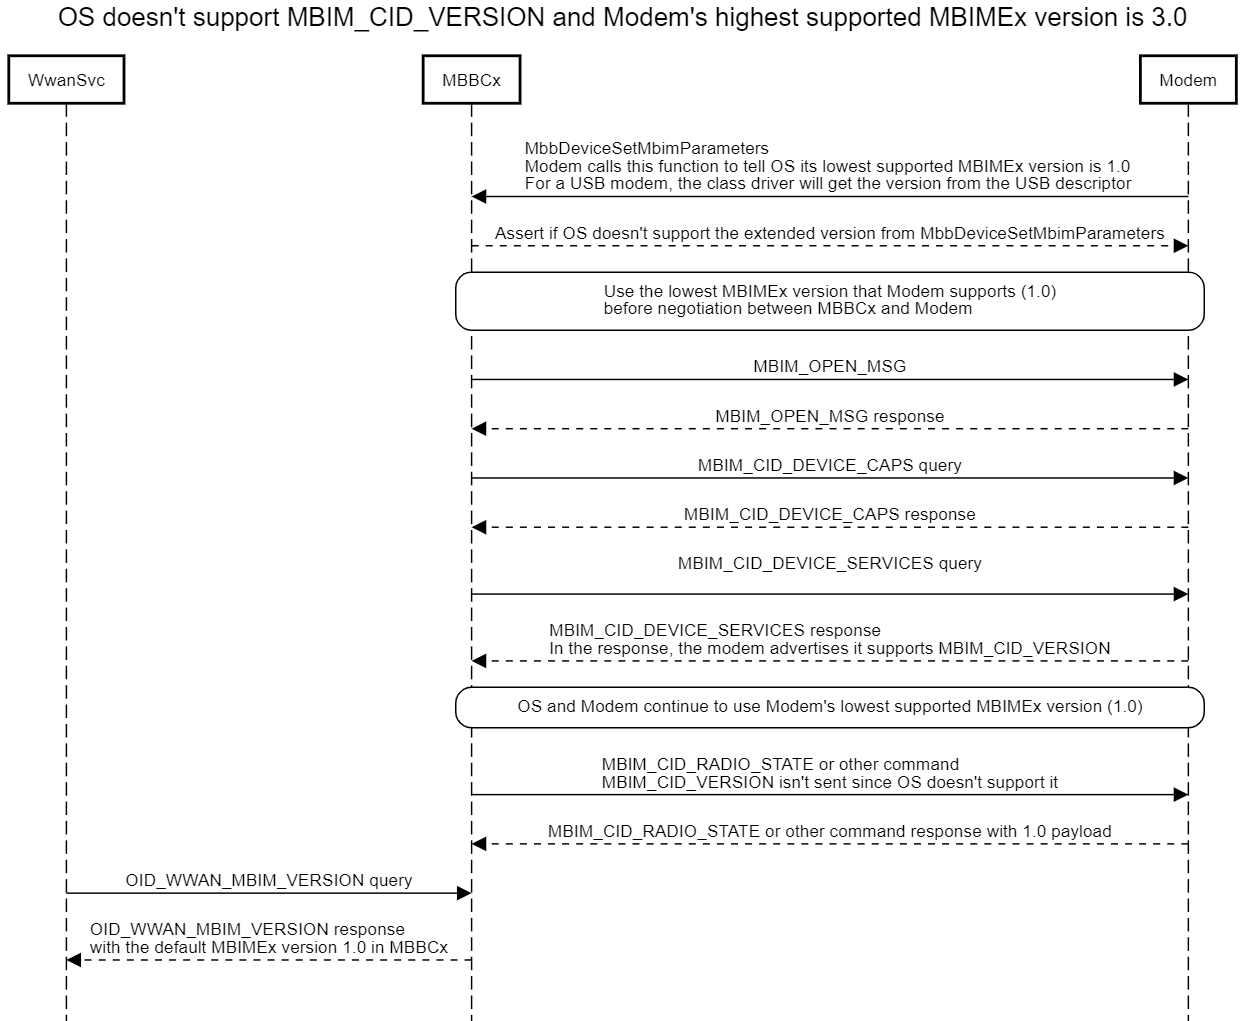 OS doesn't support MBIM_CID_VERSION and Modem's highest supported MBIMEx version is 3.0.